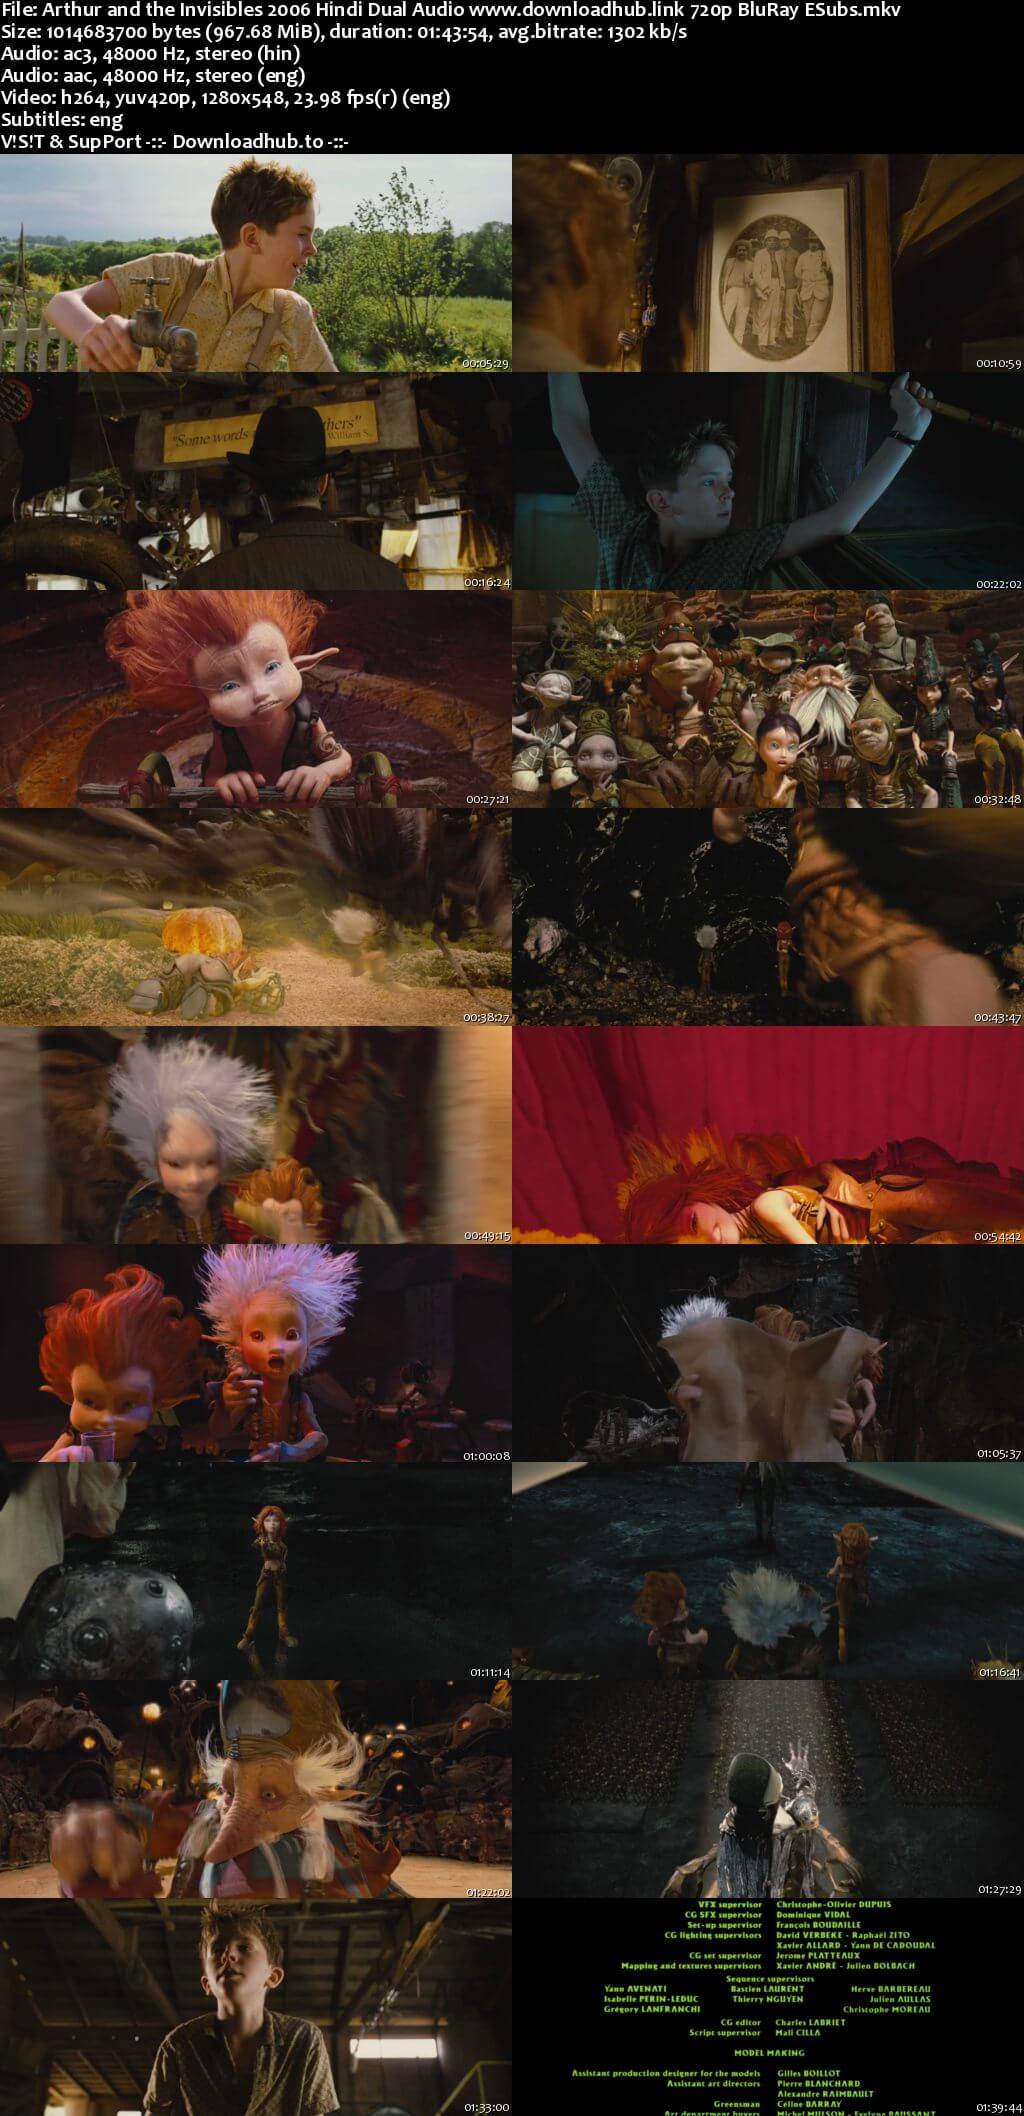 Arthur and the Invisibles 2006 Hindi Dual Audio 720p BluRay ESubs